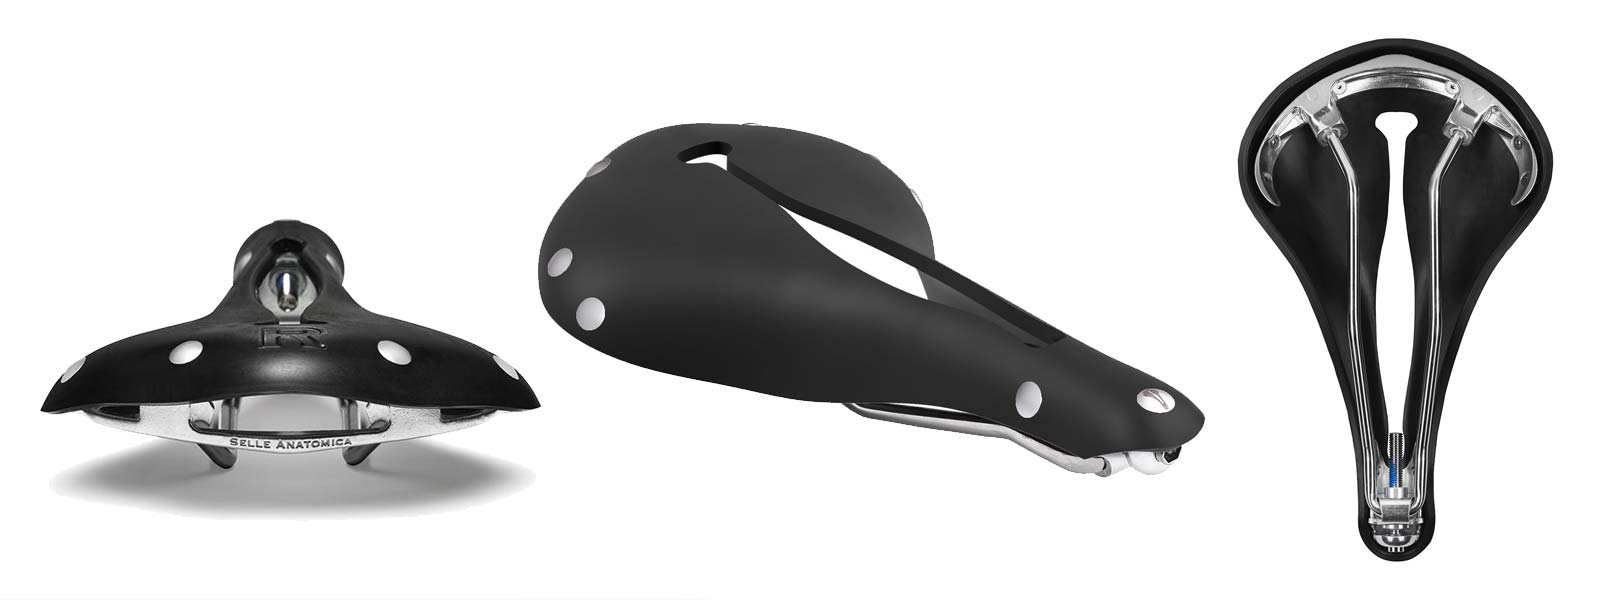 Selle Anatomica Bicycle Saddles - Pamper Your Bottom at Everyday Cycles!